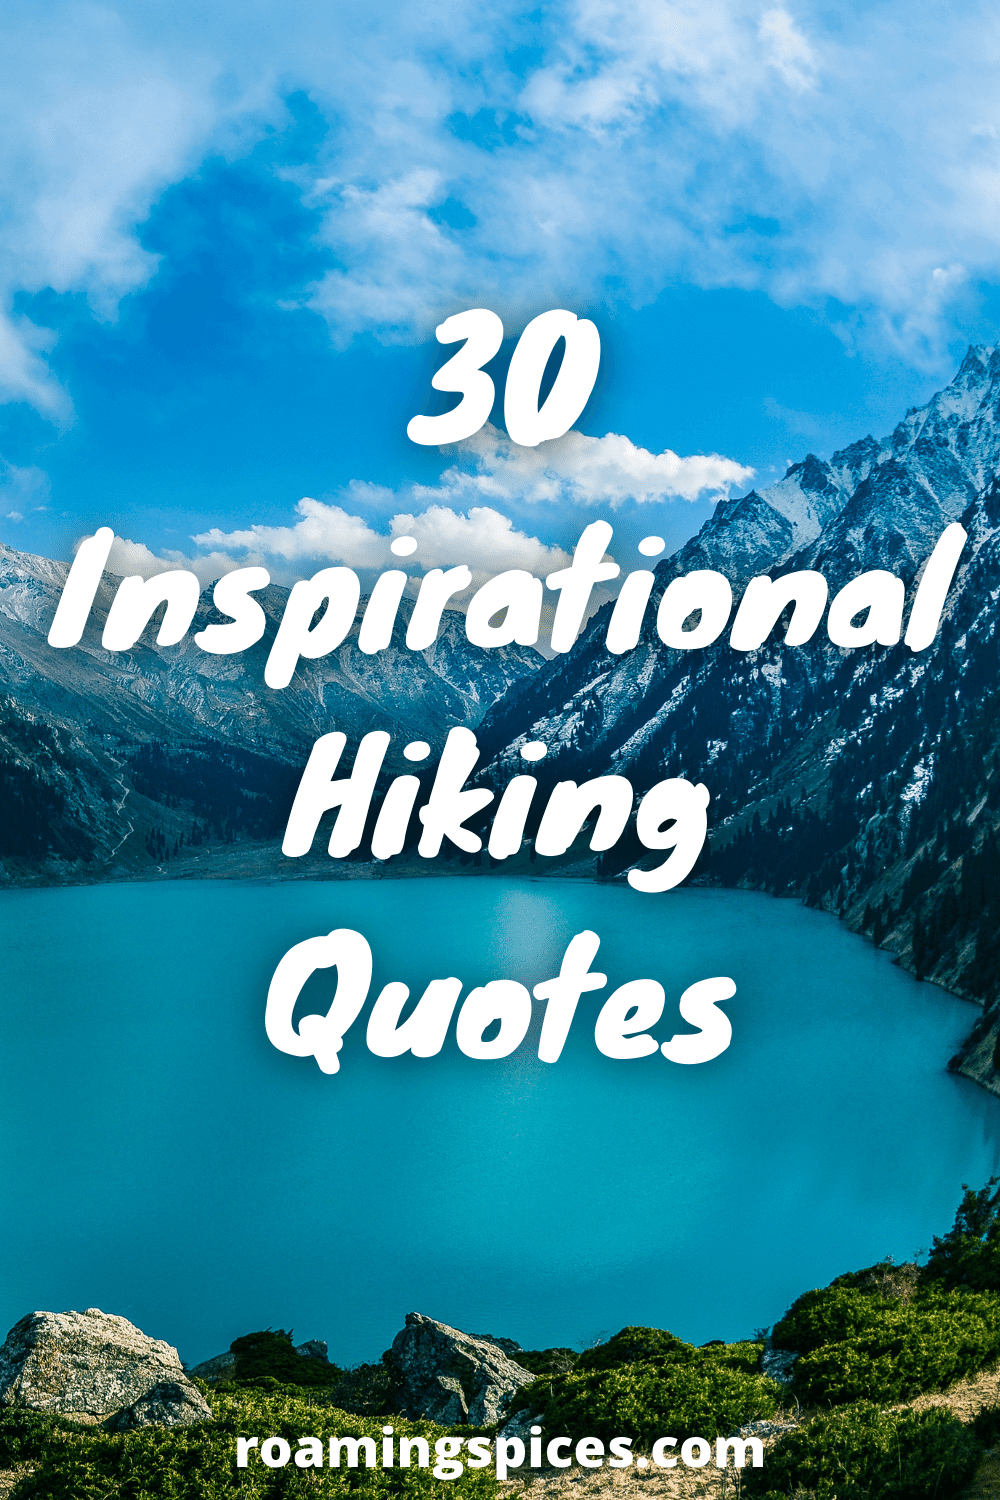 30 inspirational hiking quotes